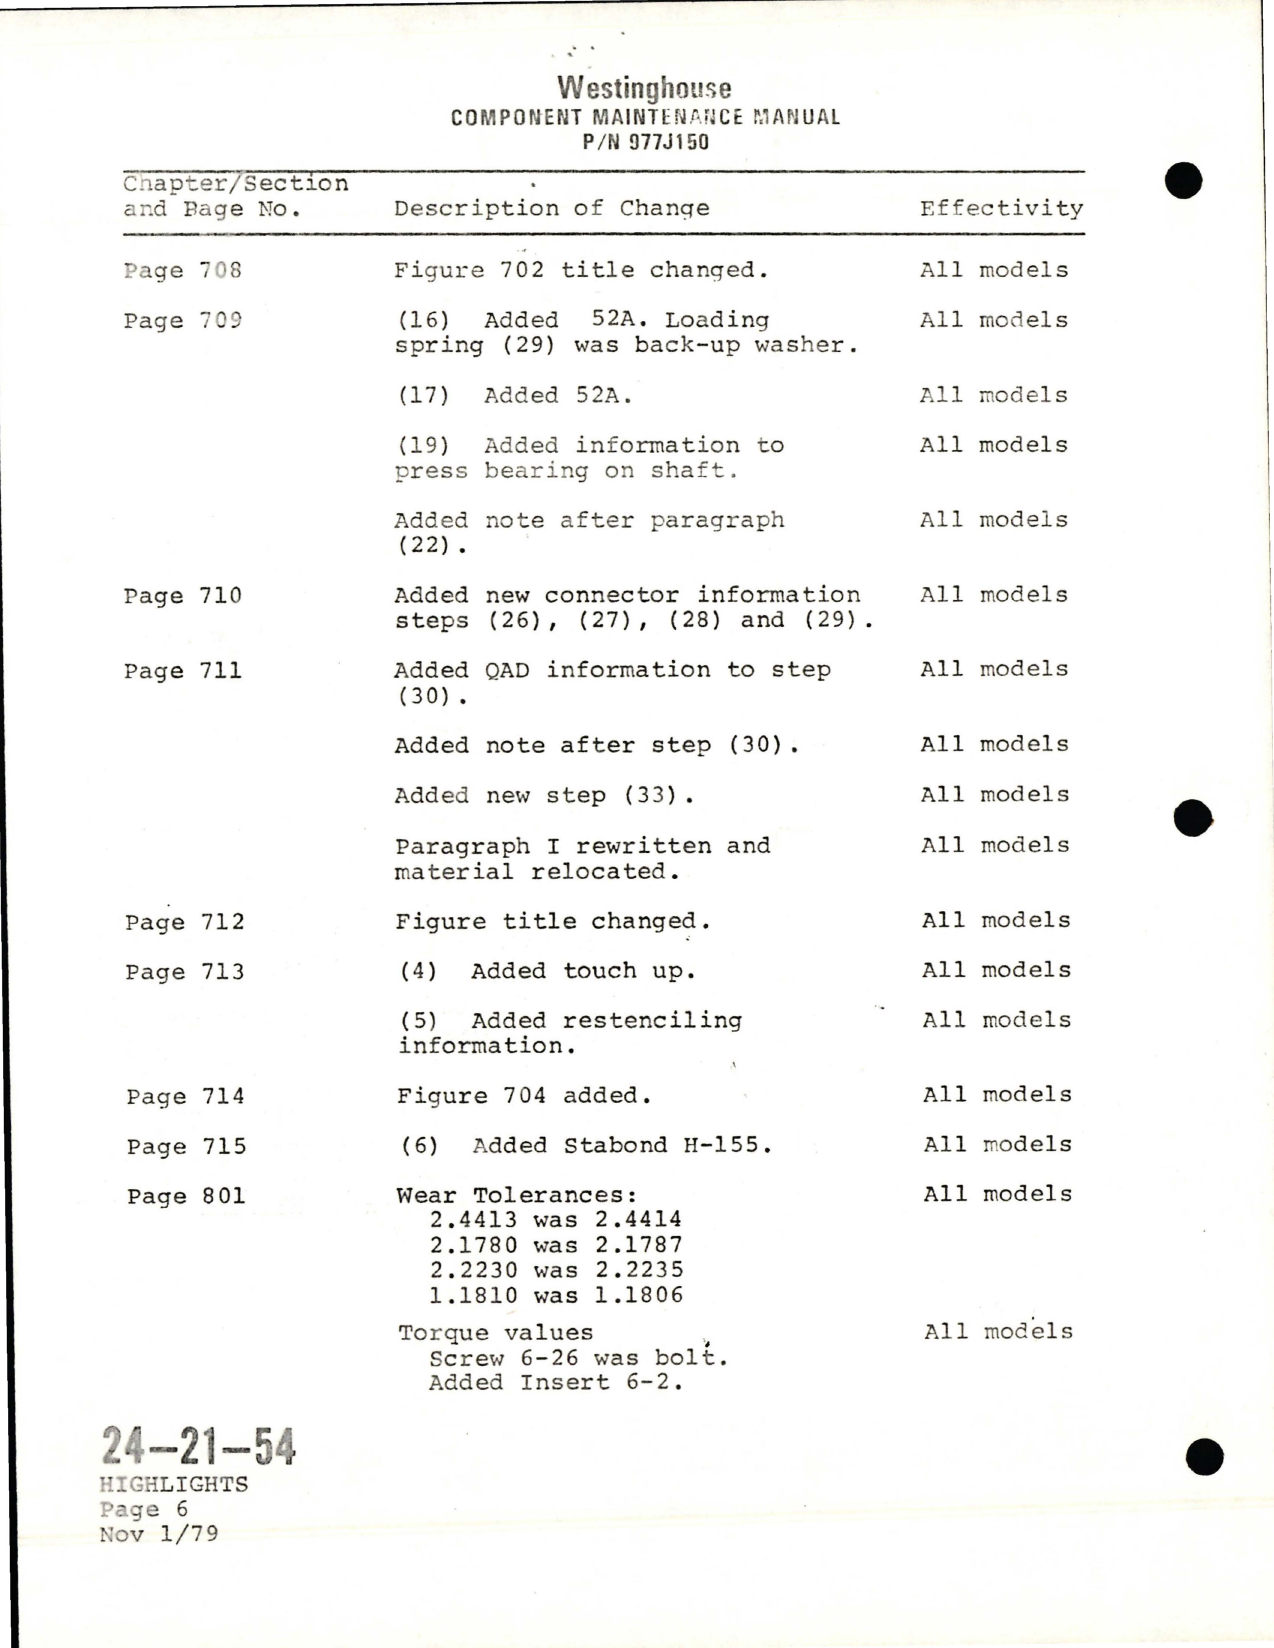 Sample page 8 from AirCorps Library document: Maintenance Manual with Illustrated Parts List for AC Generator - Parts 977J150-1, 977J150-2, 977J150-3, and 977J150-4 